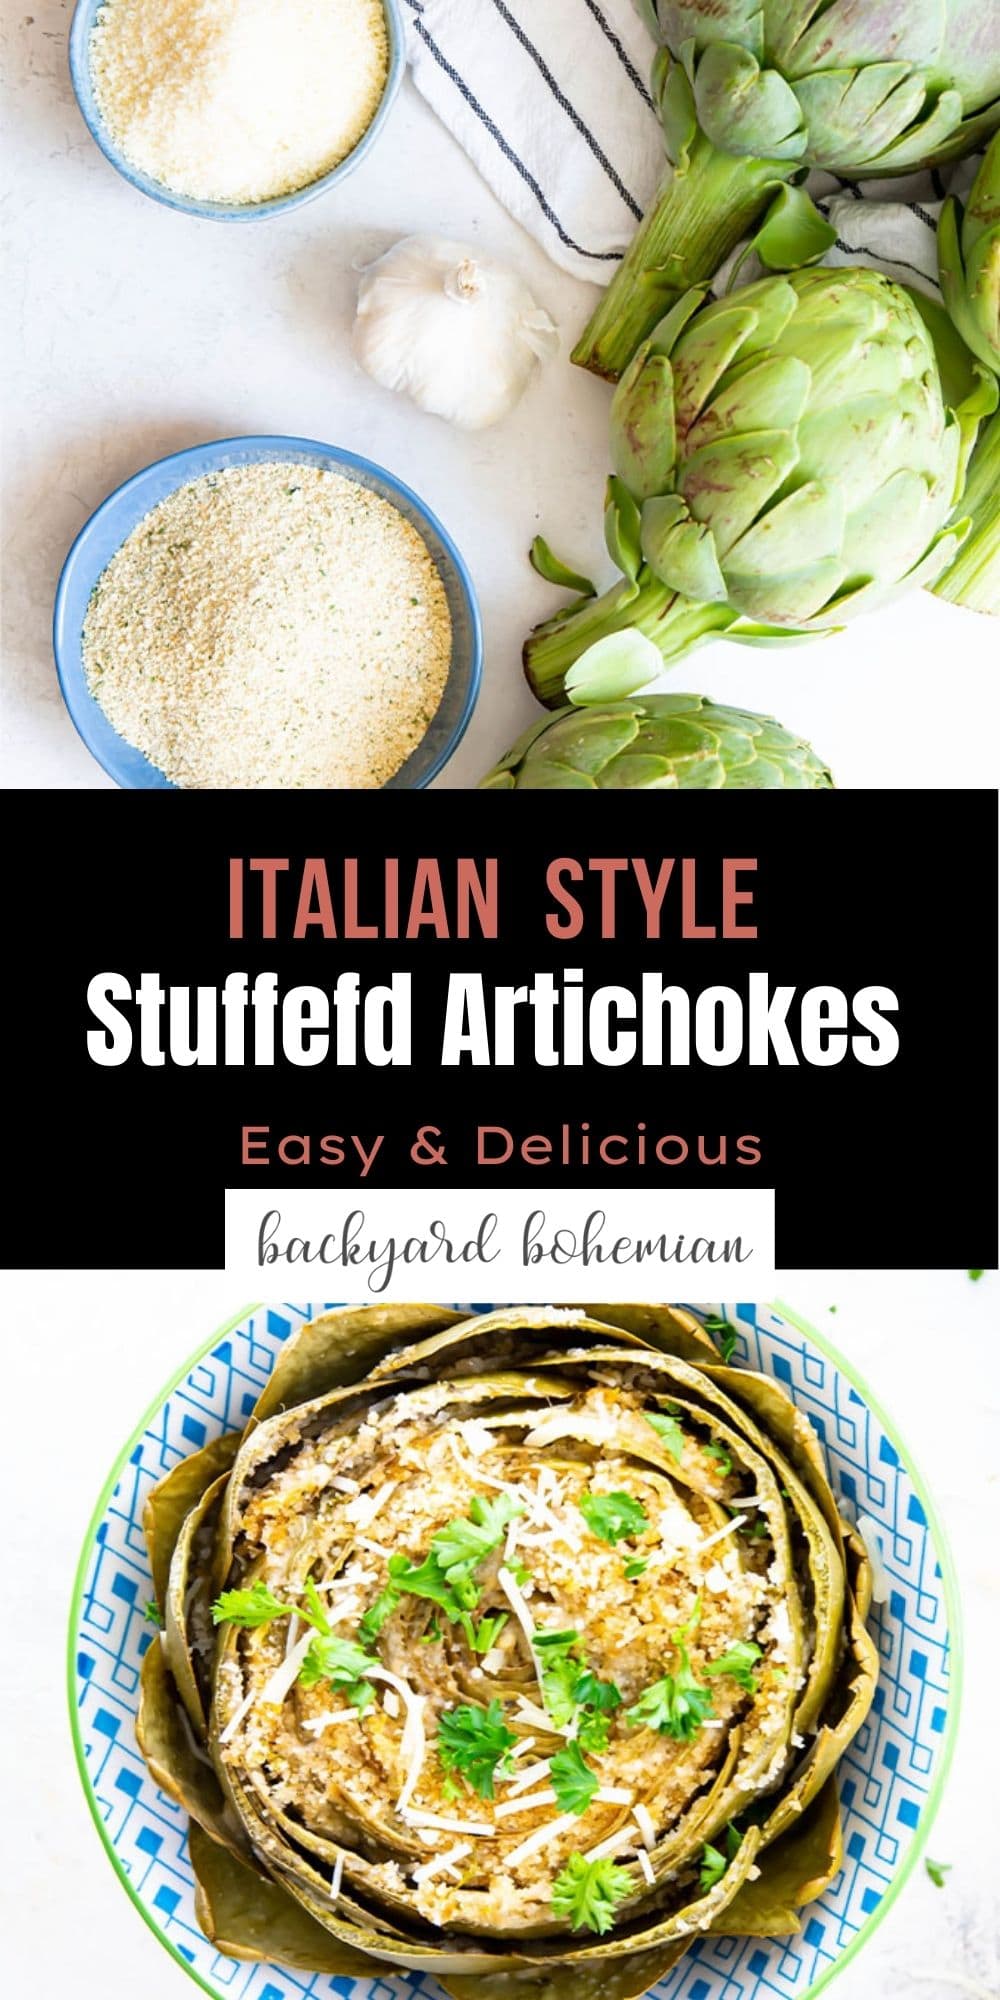 Italian stuffed artichokes are made with simple, healthy ingredients and are ready in under 1 hour. These stuffed artichokes can be made on the stovetop or the Instant Pot! via @foodhussy